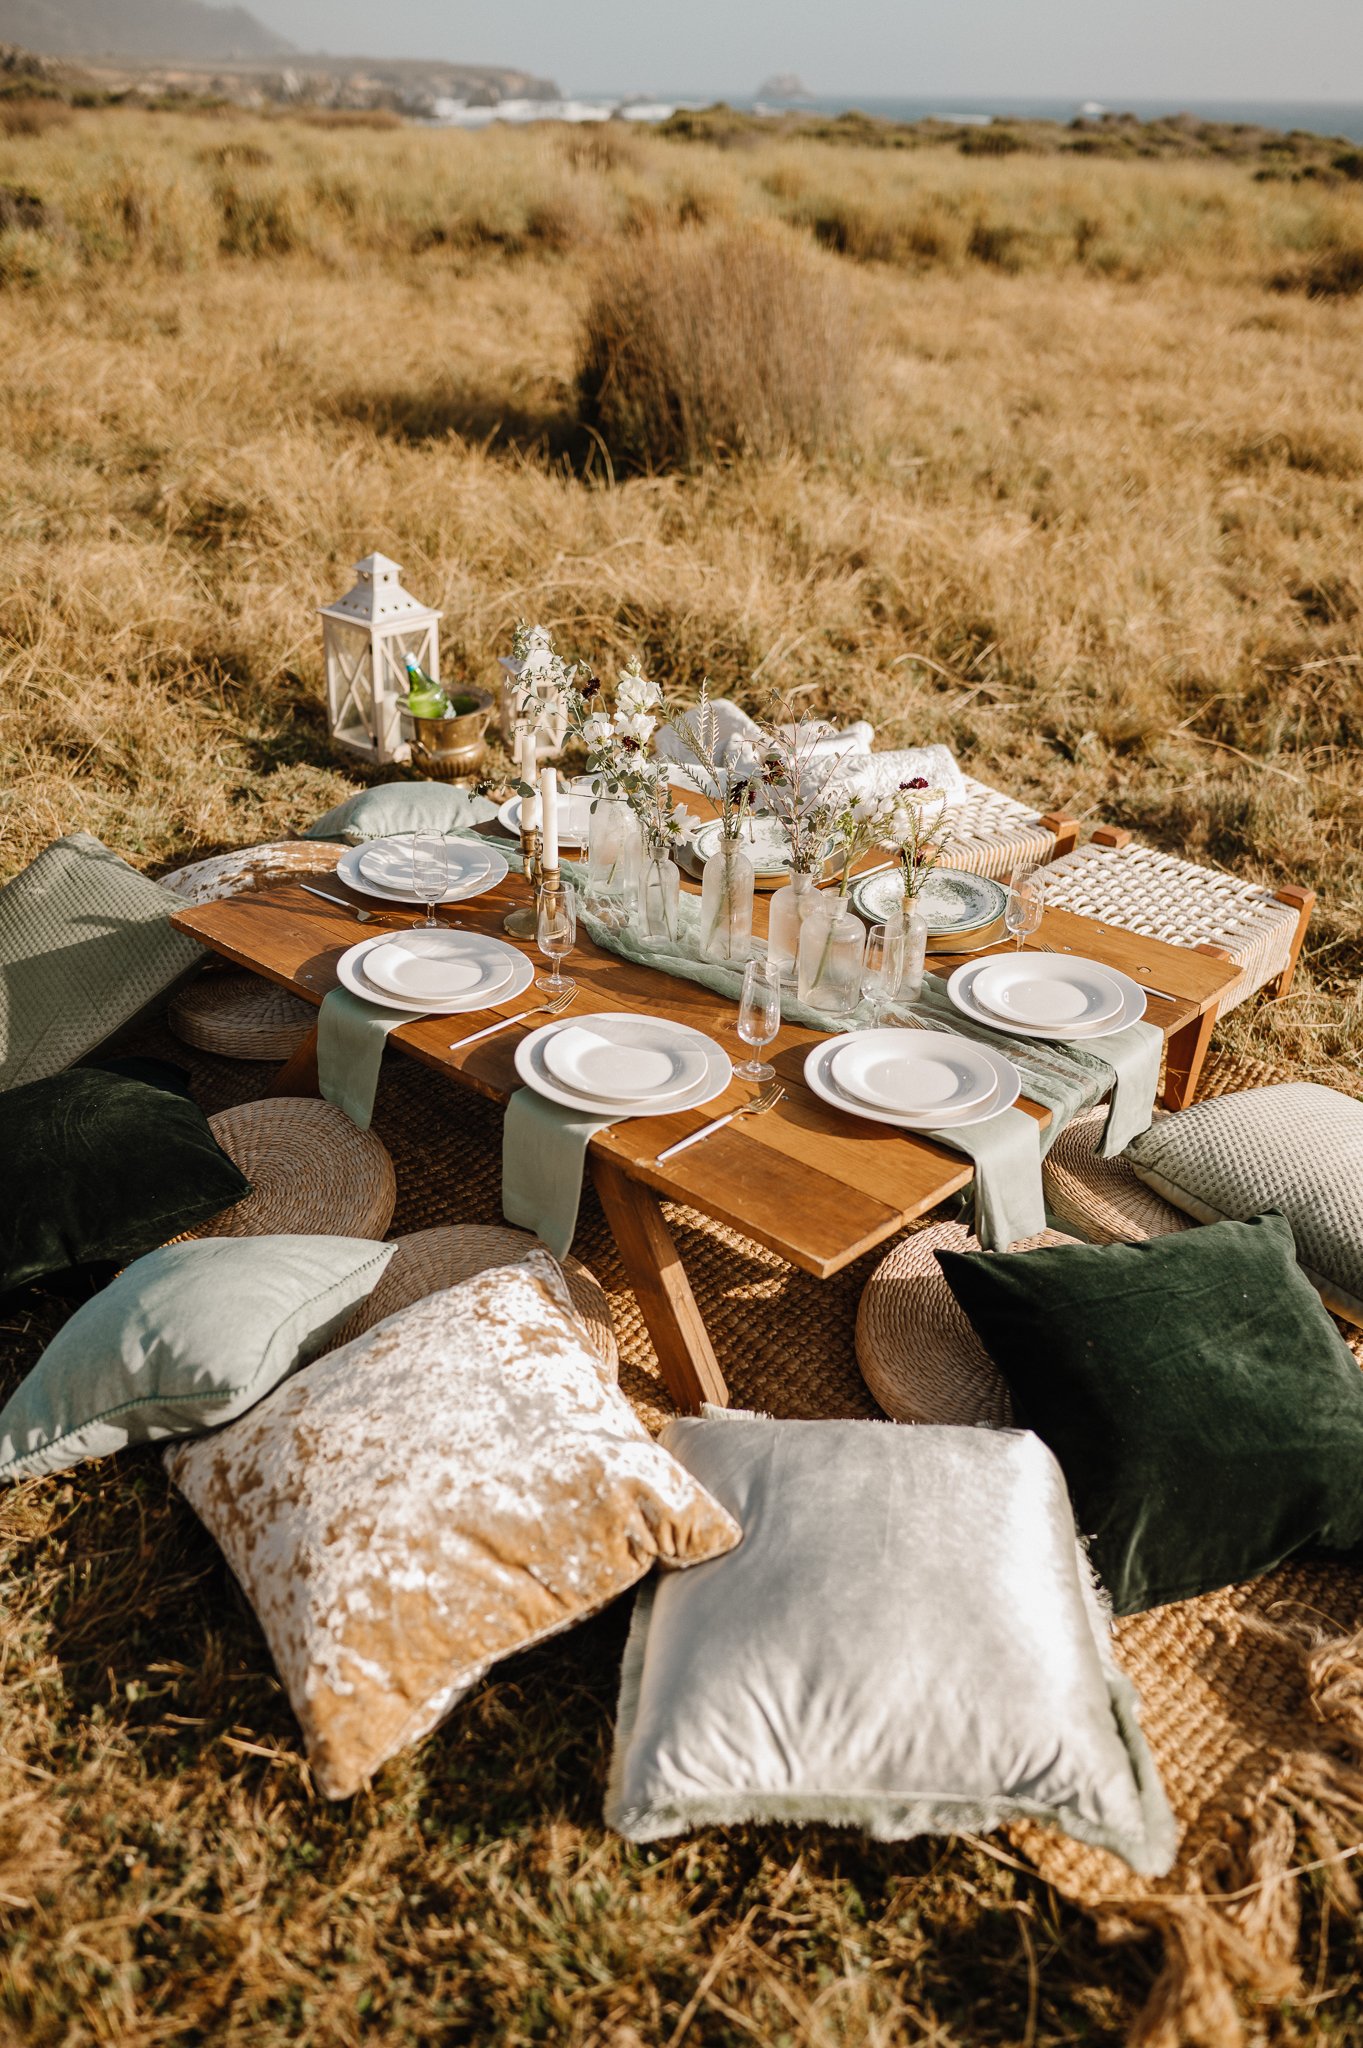 Big Sur Wedding cliffside picnic, table setup in grass with plates, glassware and pillows for all bride, groom and family